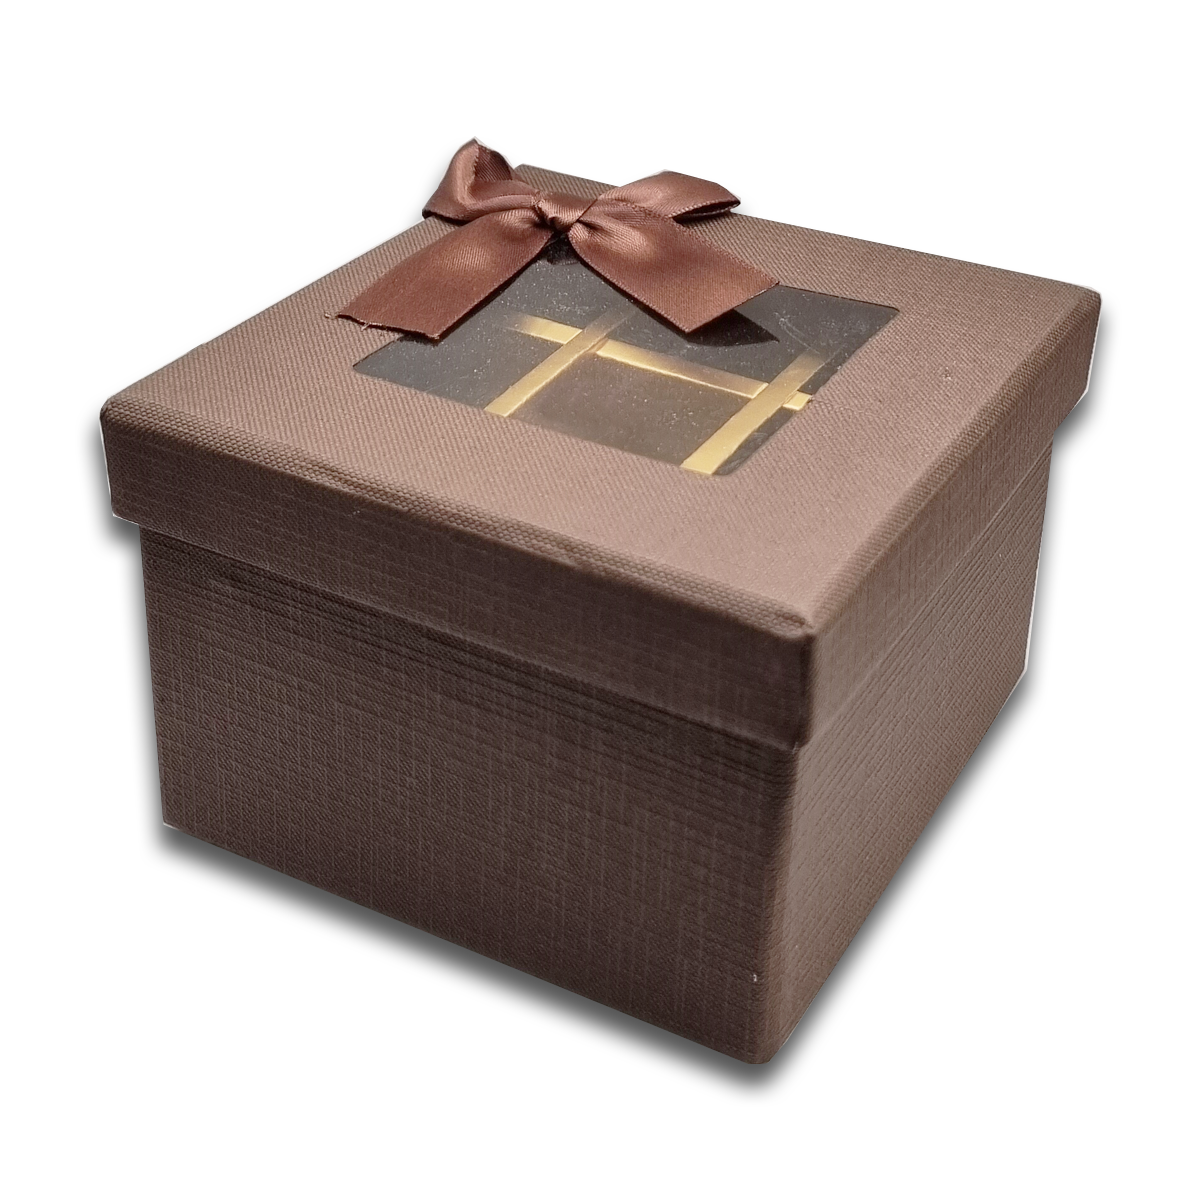 2Tier High Quality Empty Chocolate Gift Box 18 Cavities (12x12x8 Cms) 6Pc Pack - Brown